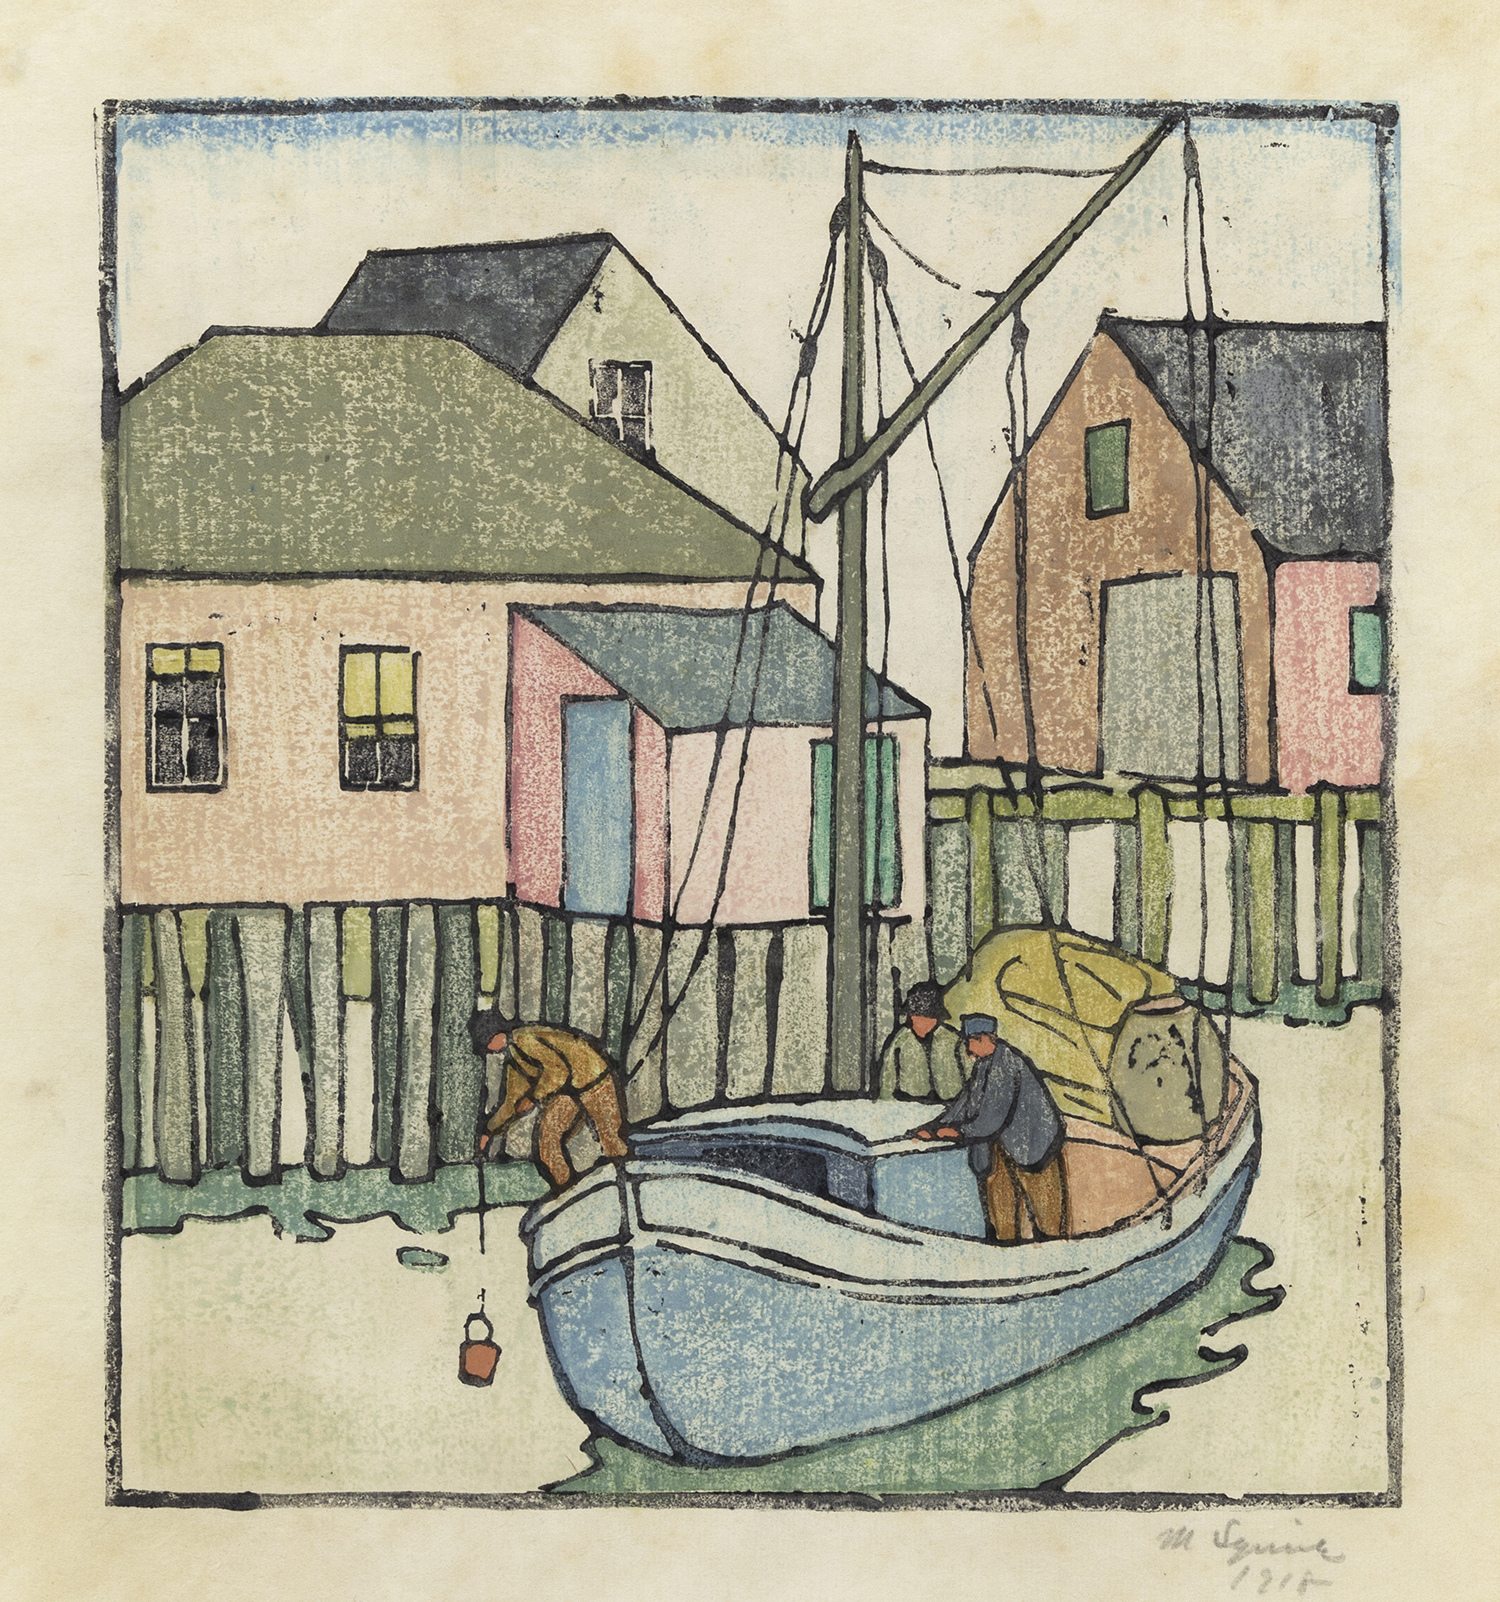 Untitled (Fisherman Setting Bait), 1918, White line woodcut, 17 1/2 x 15 1/4 inches (44.5 x 38.7 cm), Edition size unknown, rare